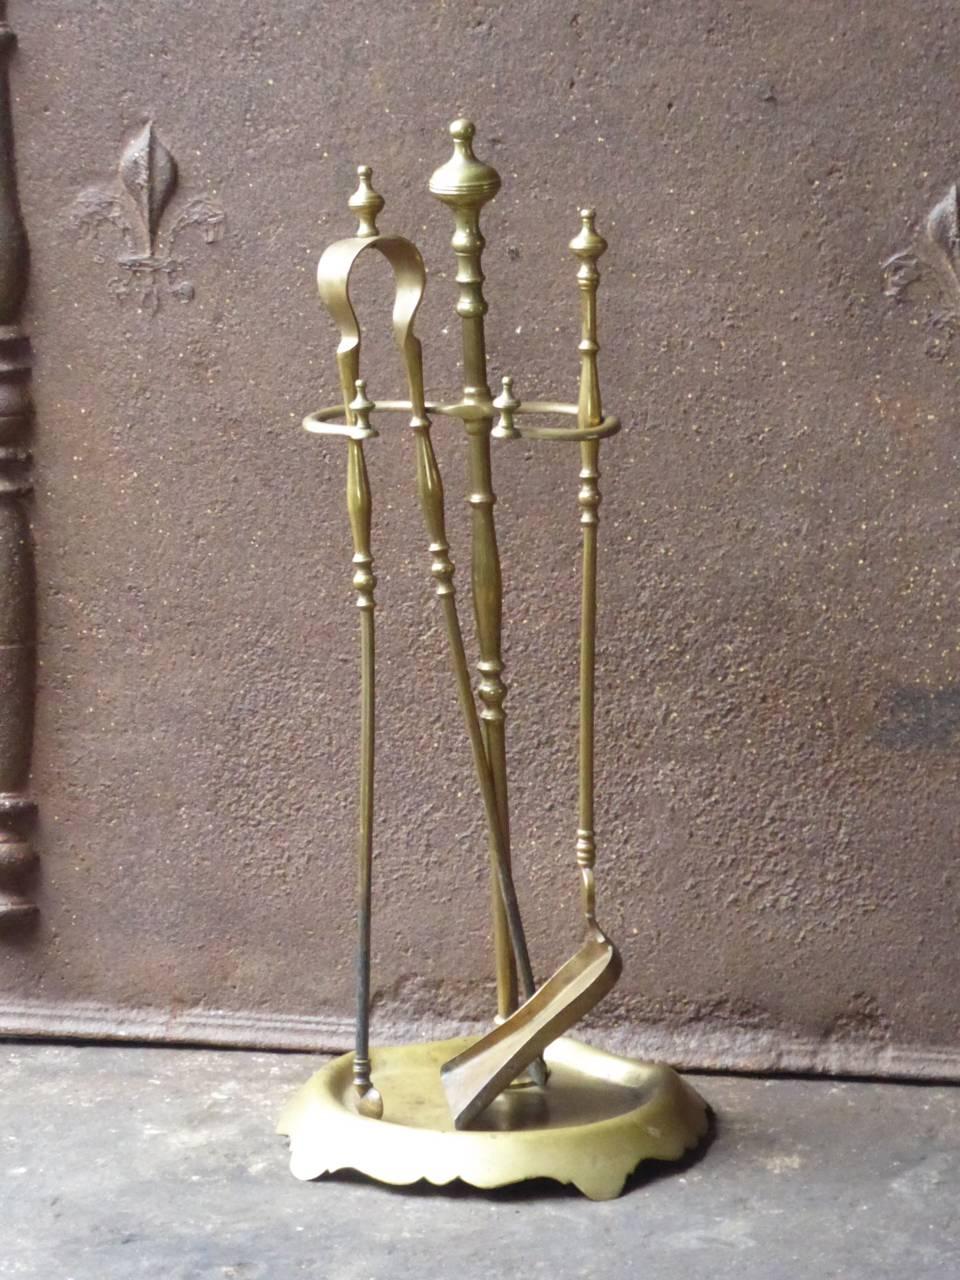 19th century French fireplace tool set made of brass. The fire irons are made by Bouhon Frères which were prominent French producers of fireplace tools in the 19th century. The firm participated in the 1878 and 1900 Paris Expositions Universelles.